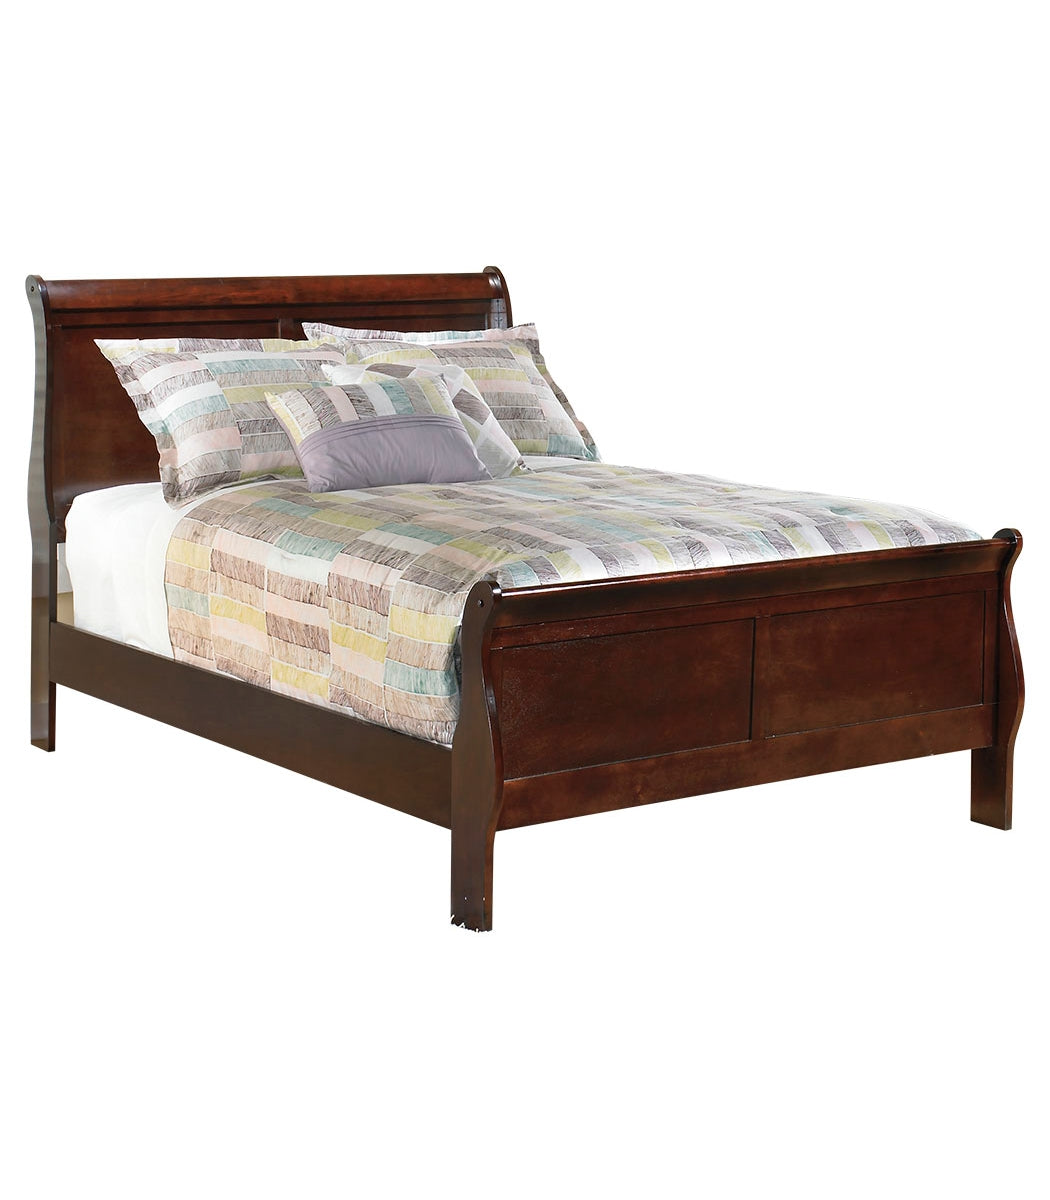 Alisdair Full Sleigh Bed with Mirrored Dresser and Chest